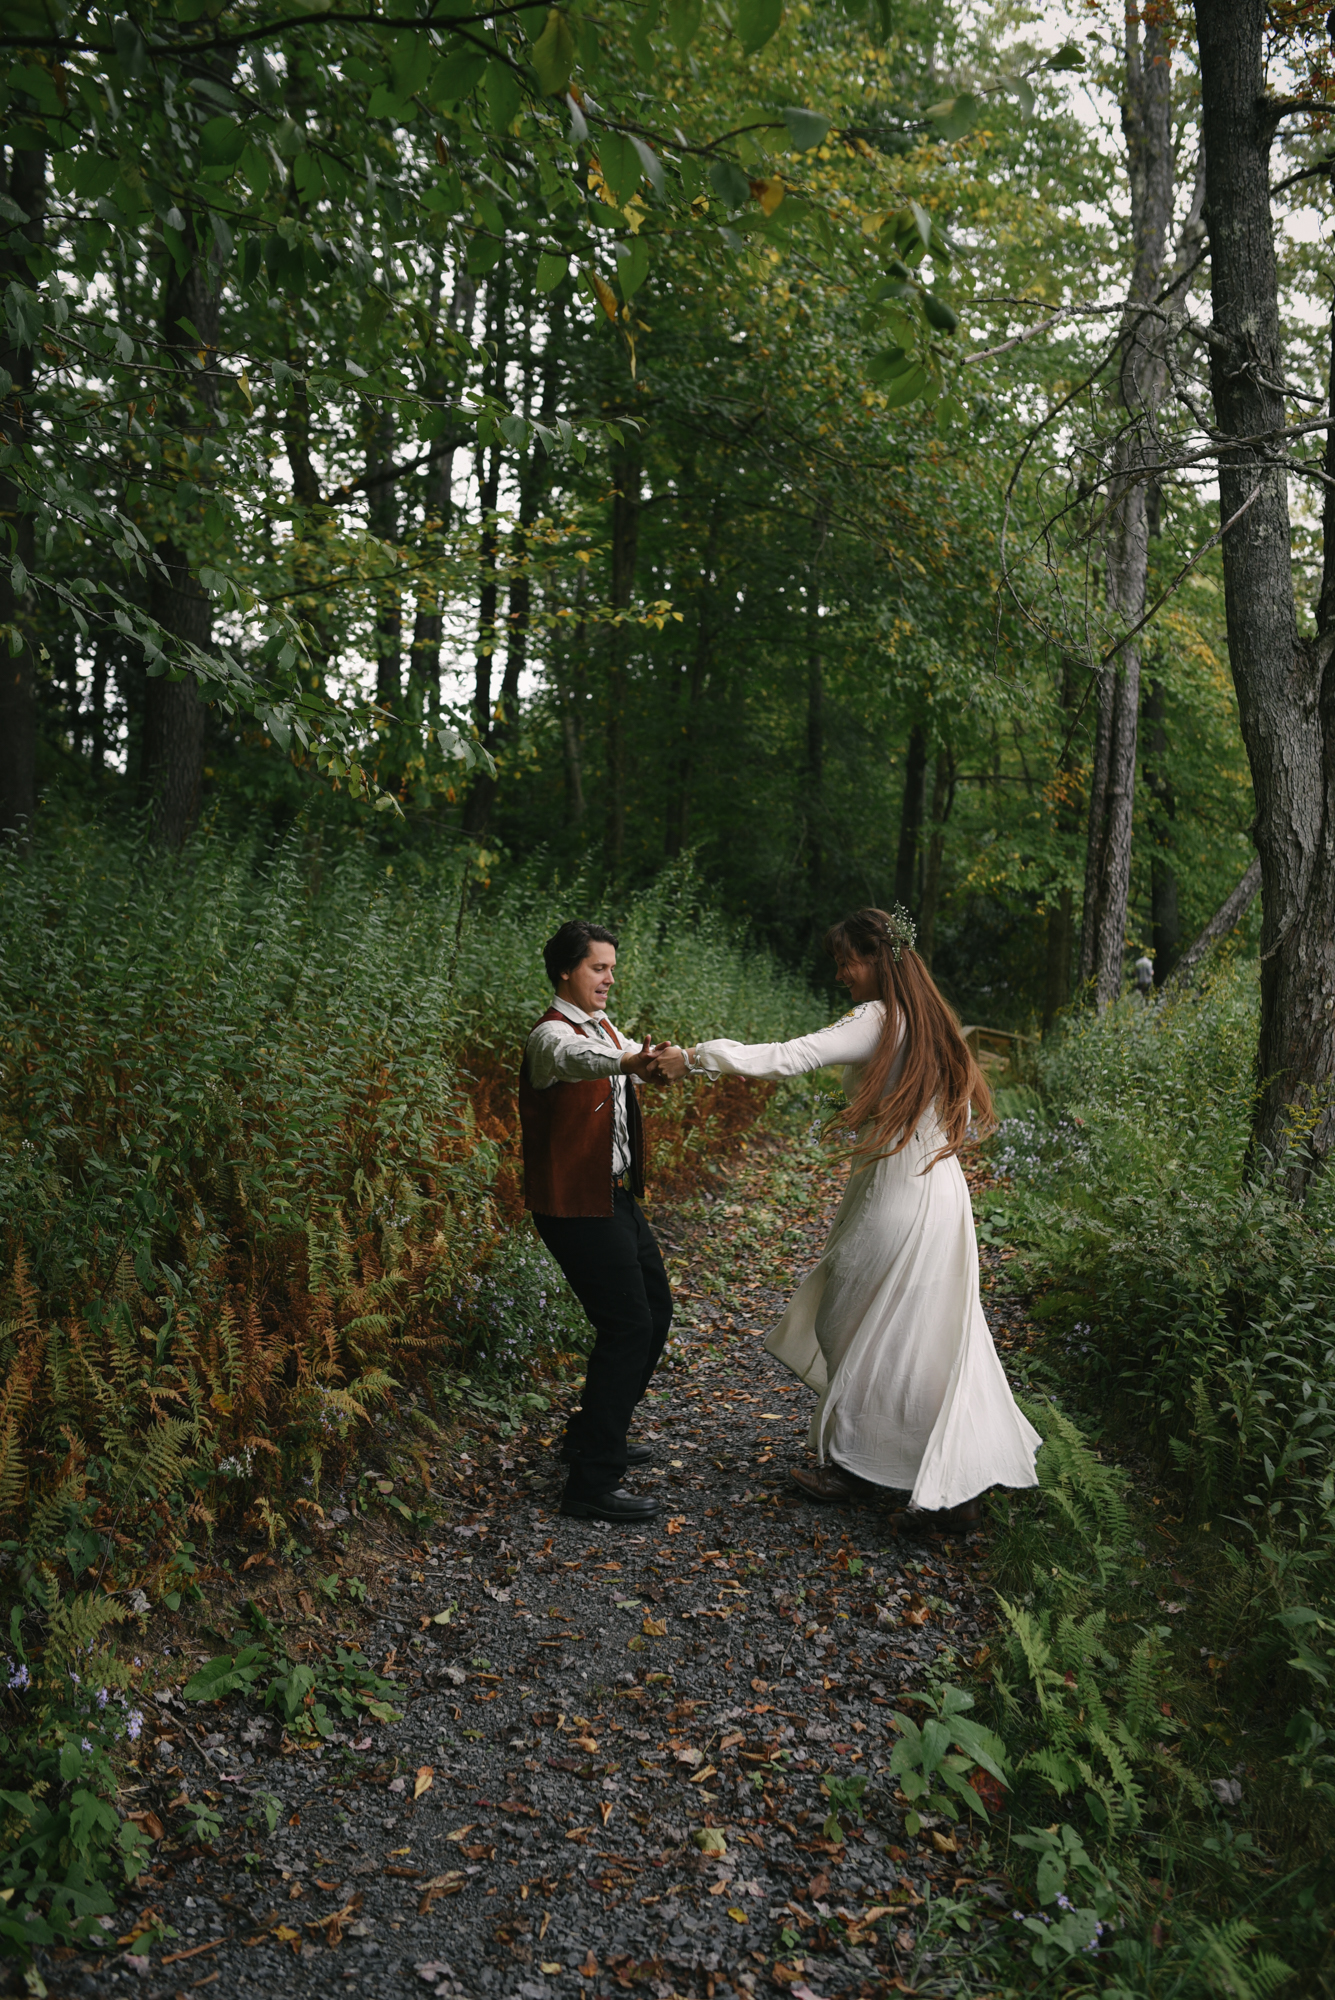  Mountain Wedding, Outdoors, Rustic, West Virginia, Maryland Wedding Photographer, DIY, Casual, bride and groom dancing on trail in the woods, boho, etherial  